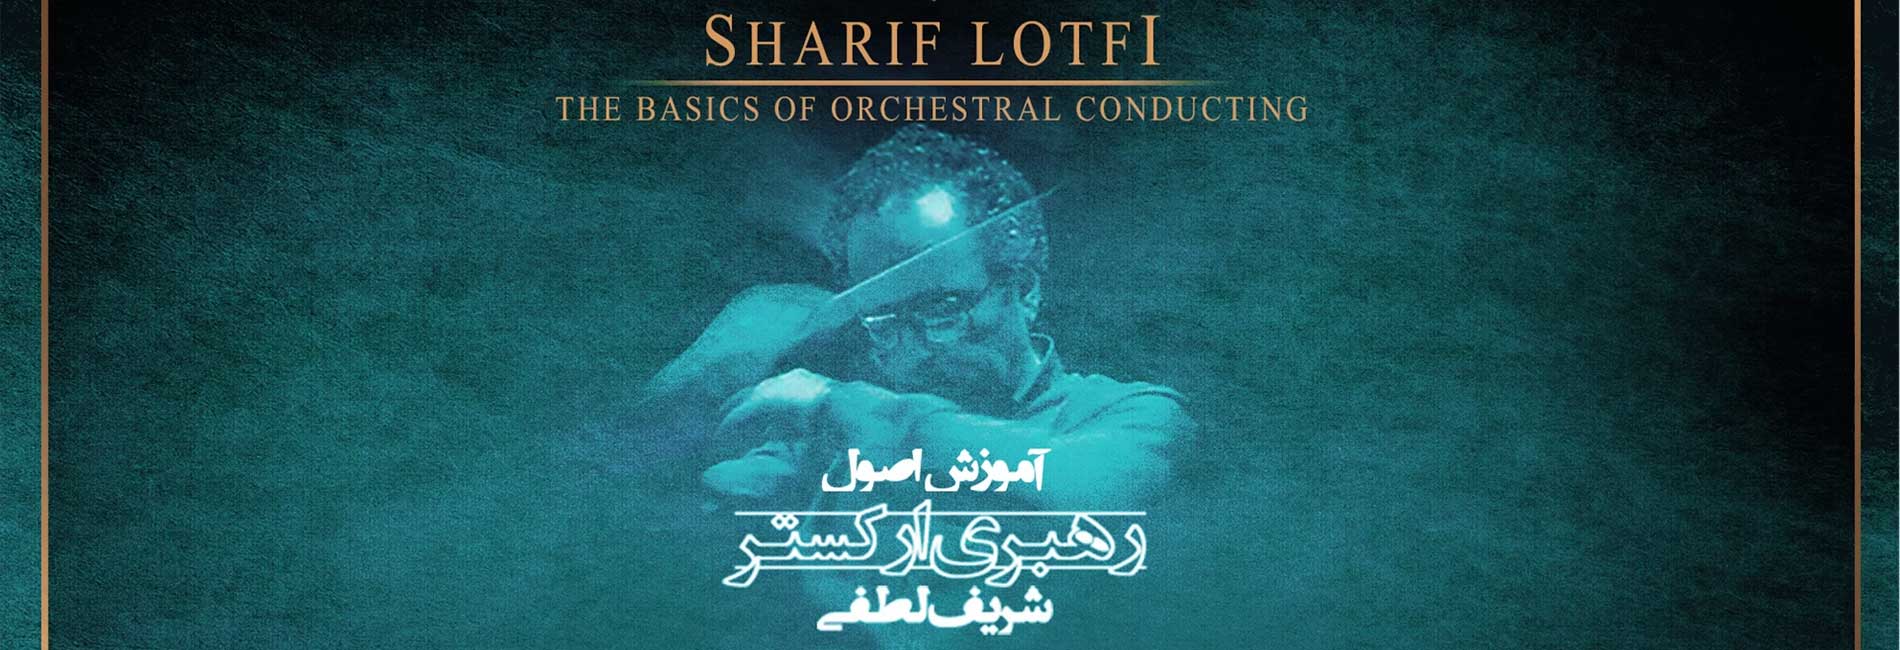 Teaching the principles of conducting an orchestra by Sharif Lotfi-هاشور